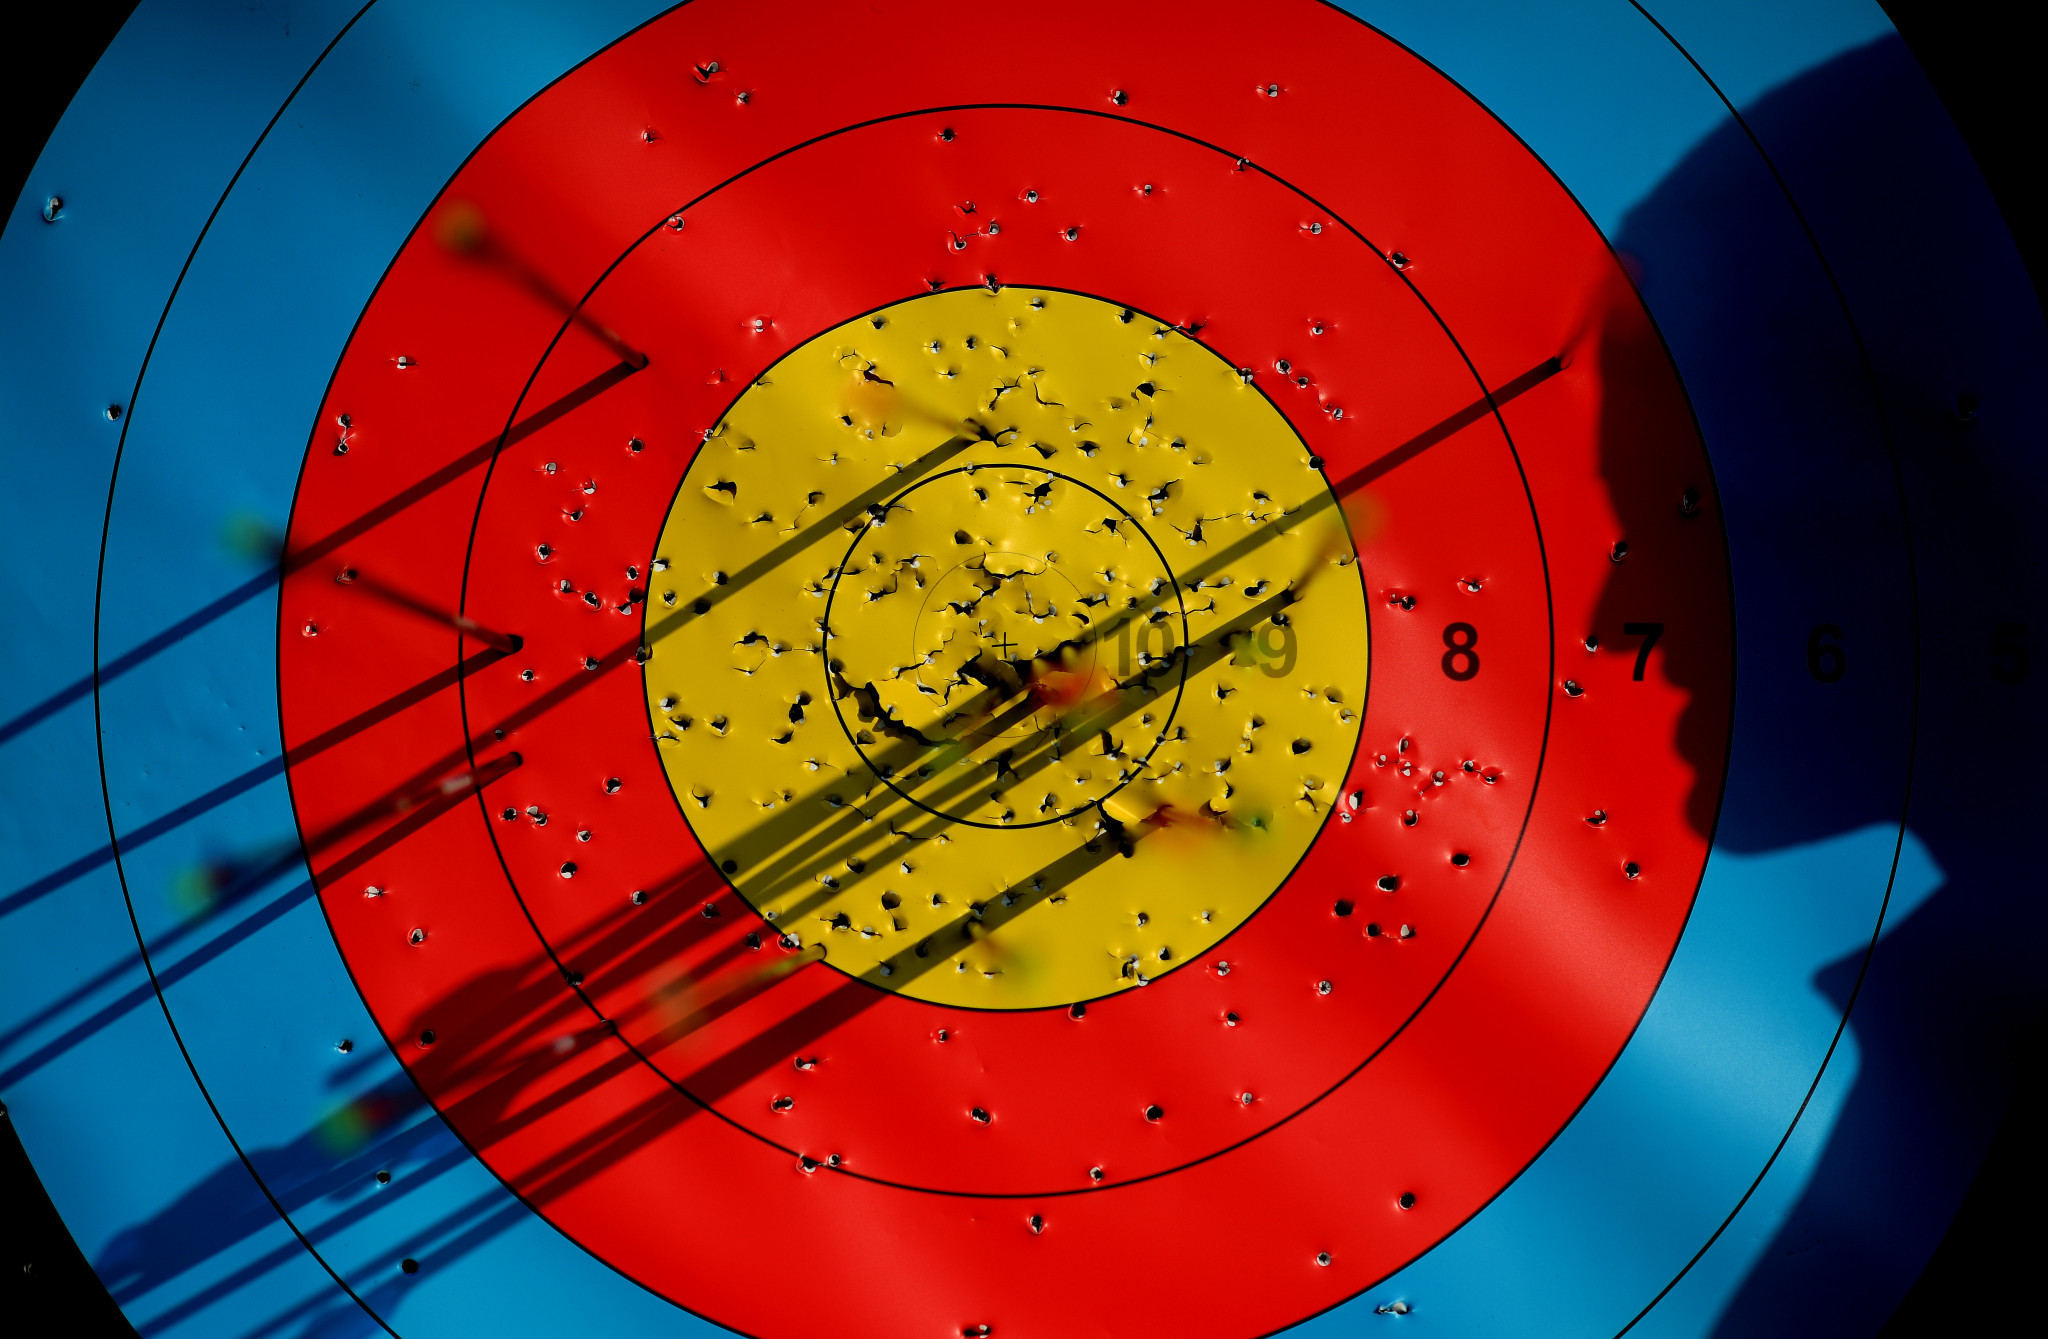 Vanderwier beats Pearce to earn compound final fours place at Archery World Cup